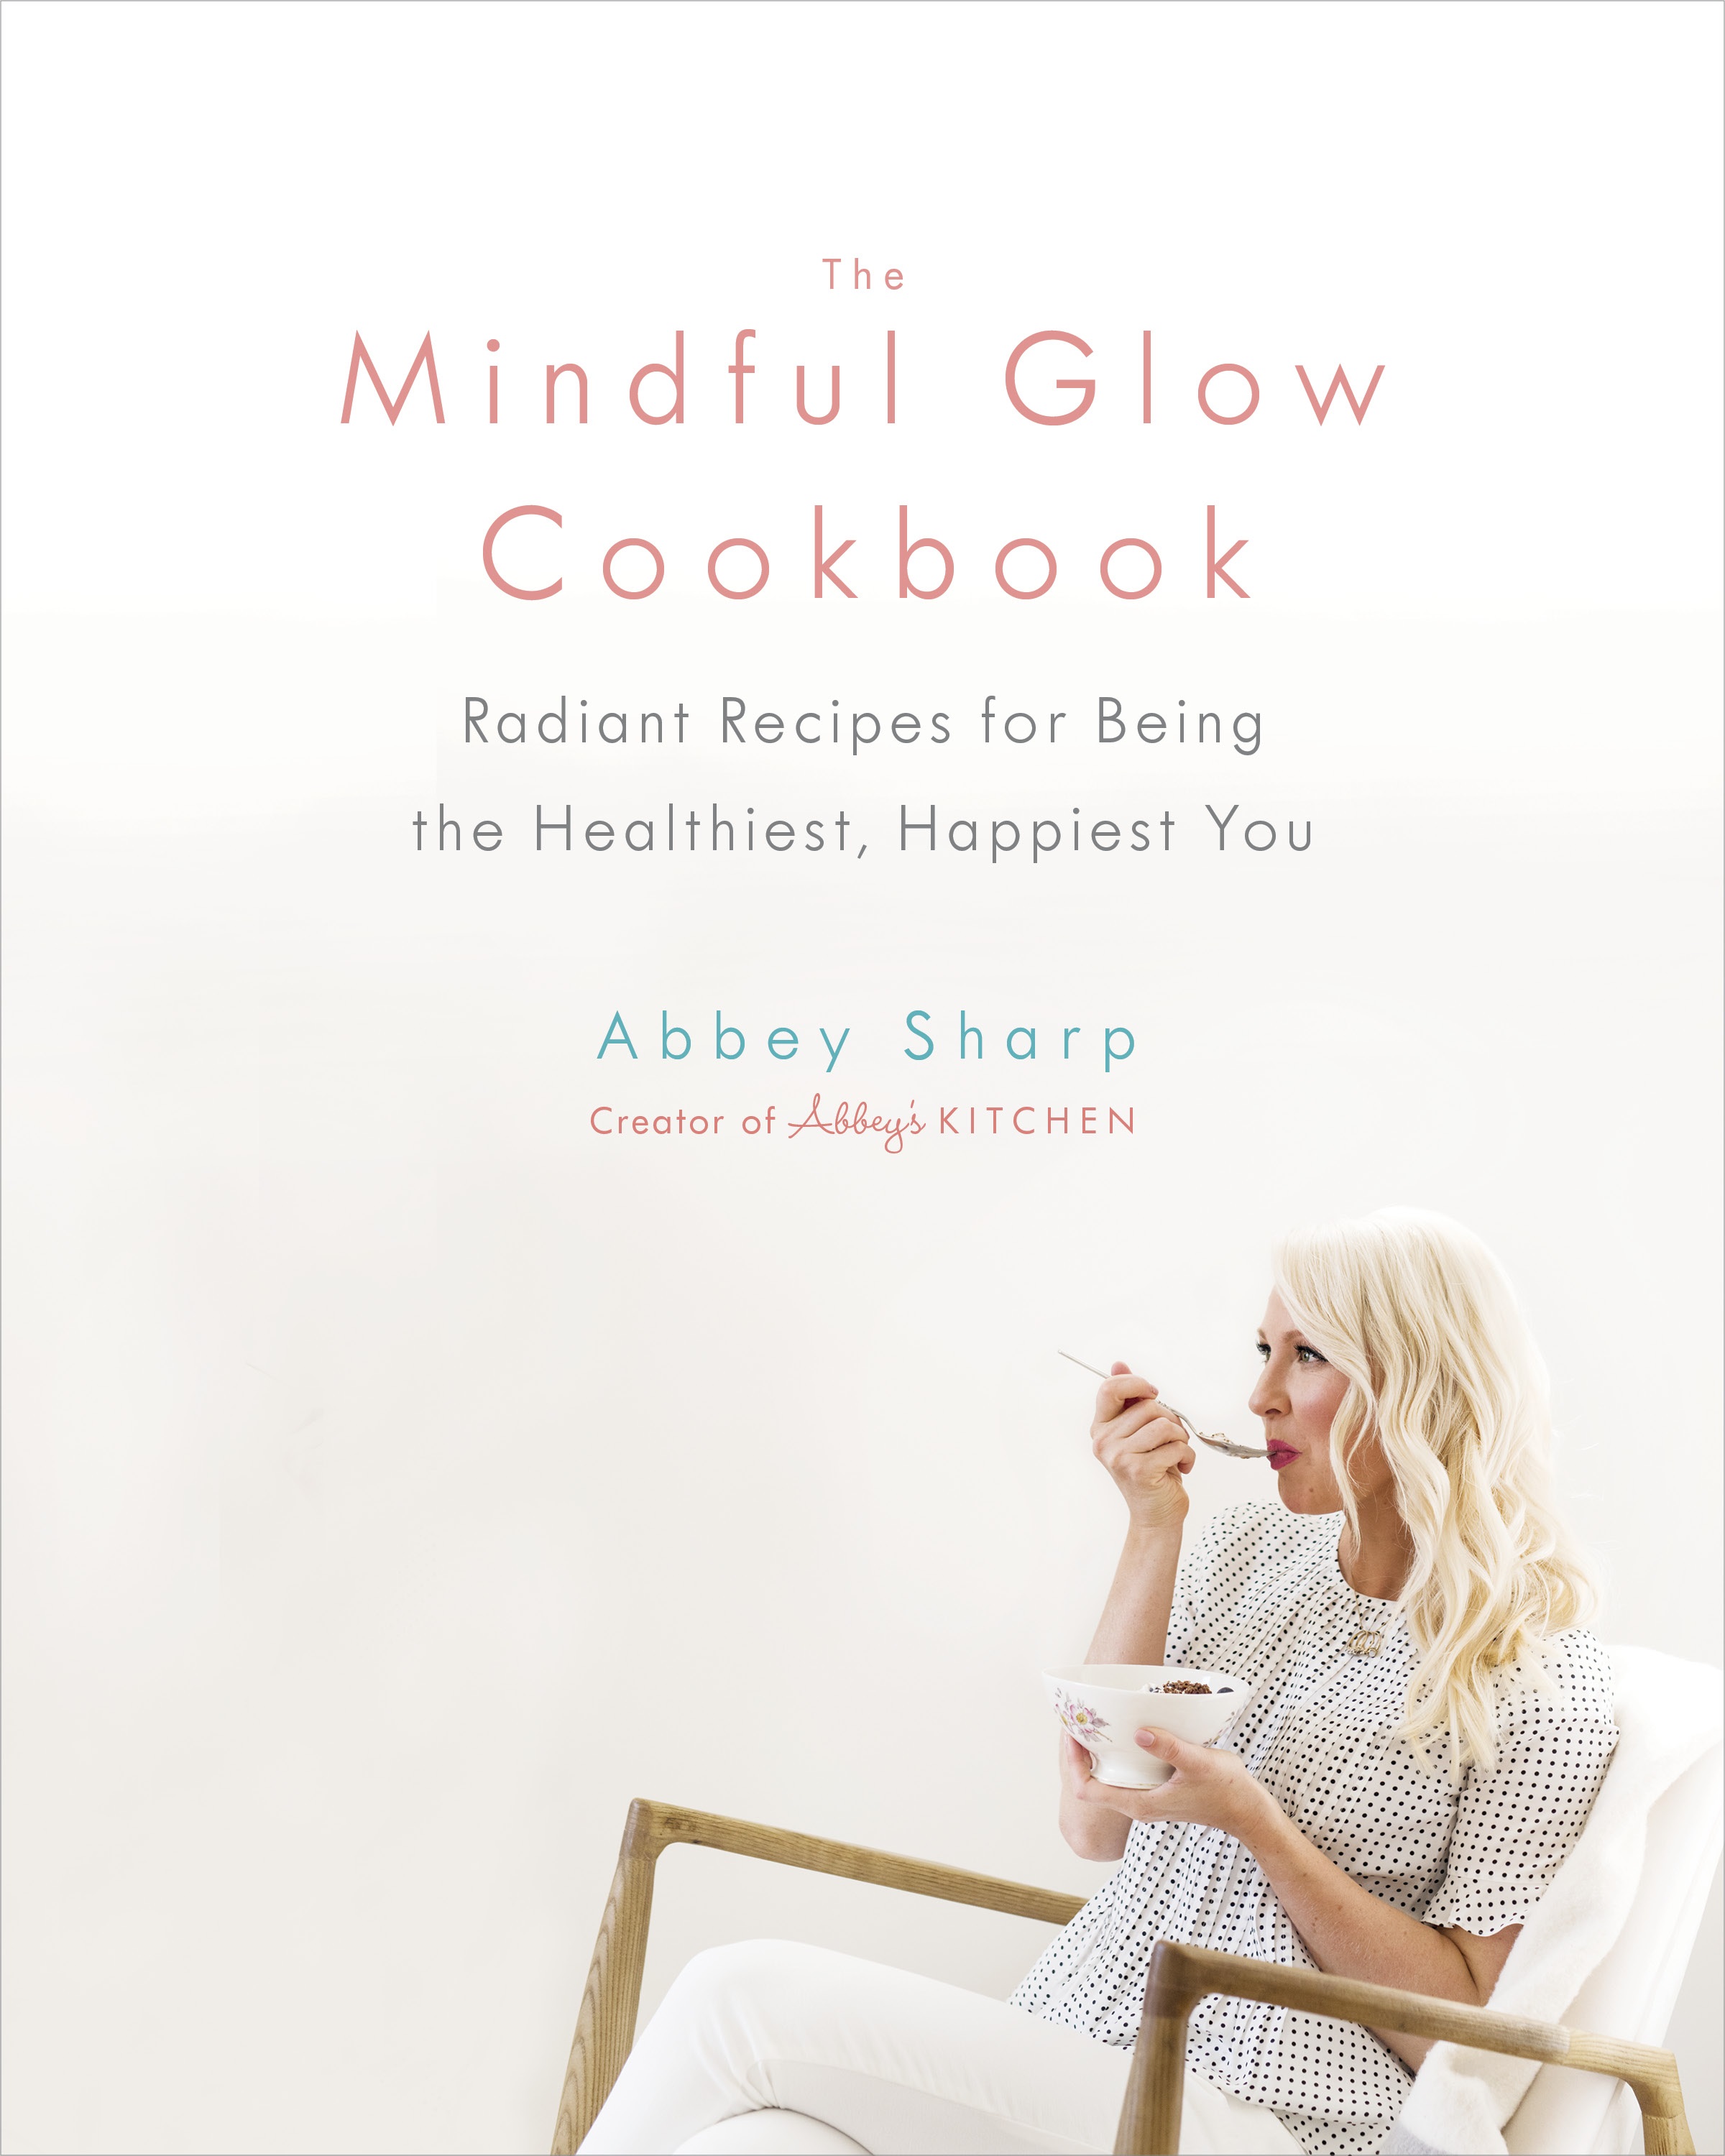 The Mindful Glow cookbook cover